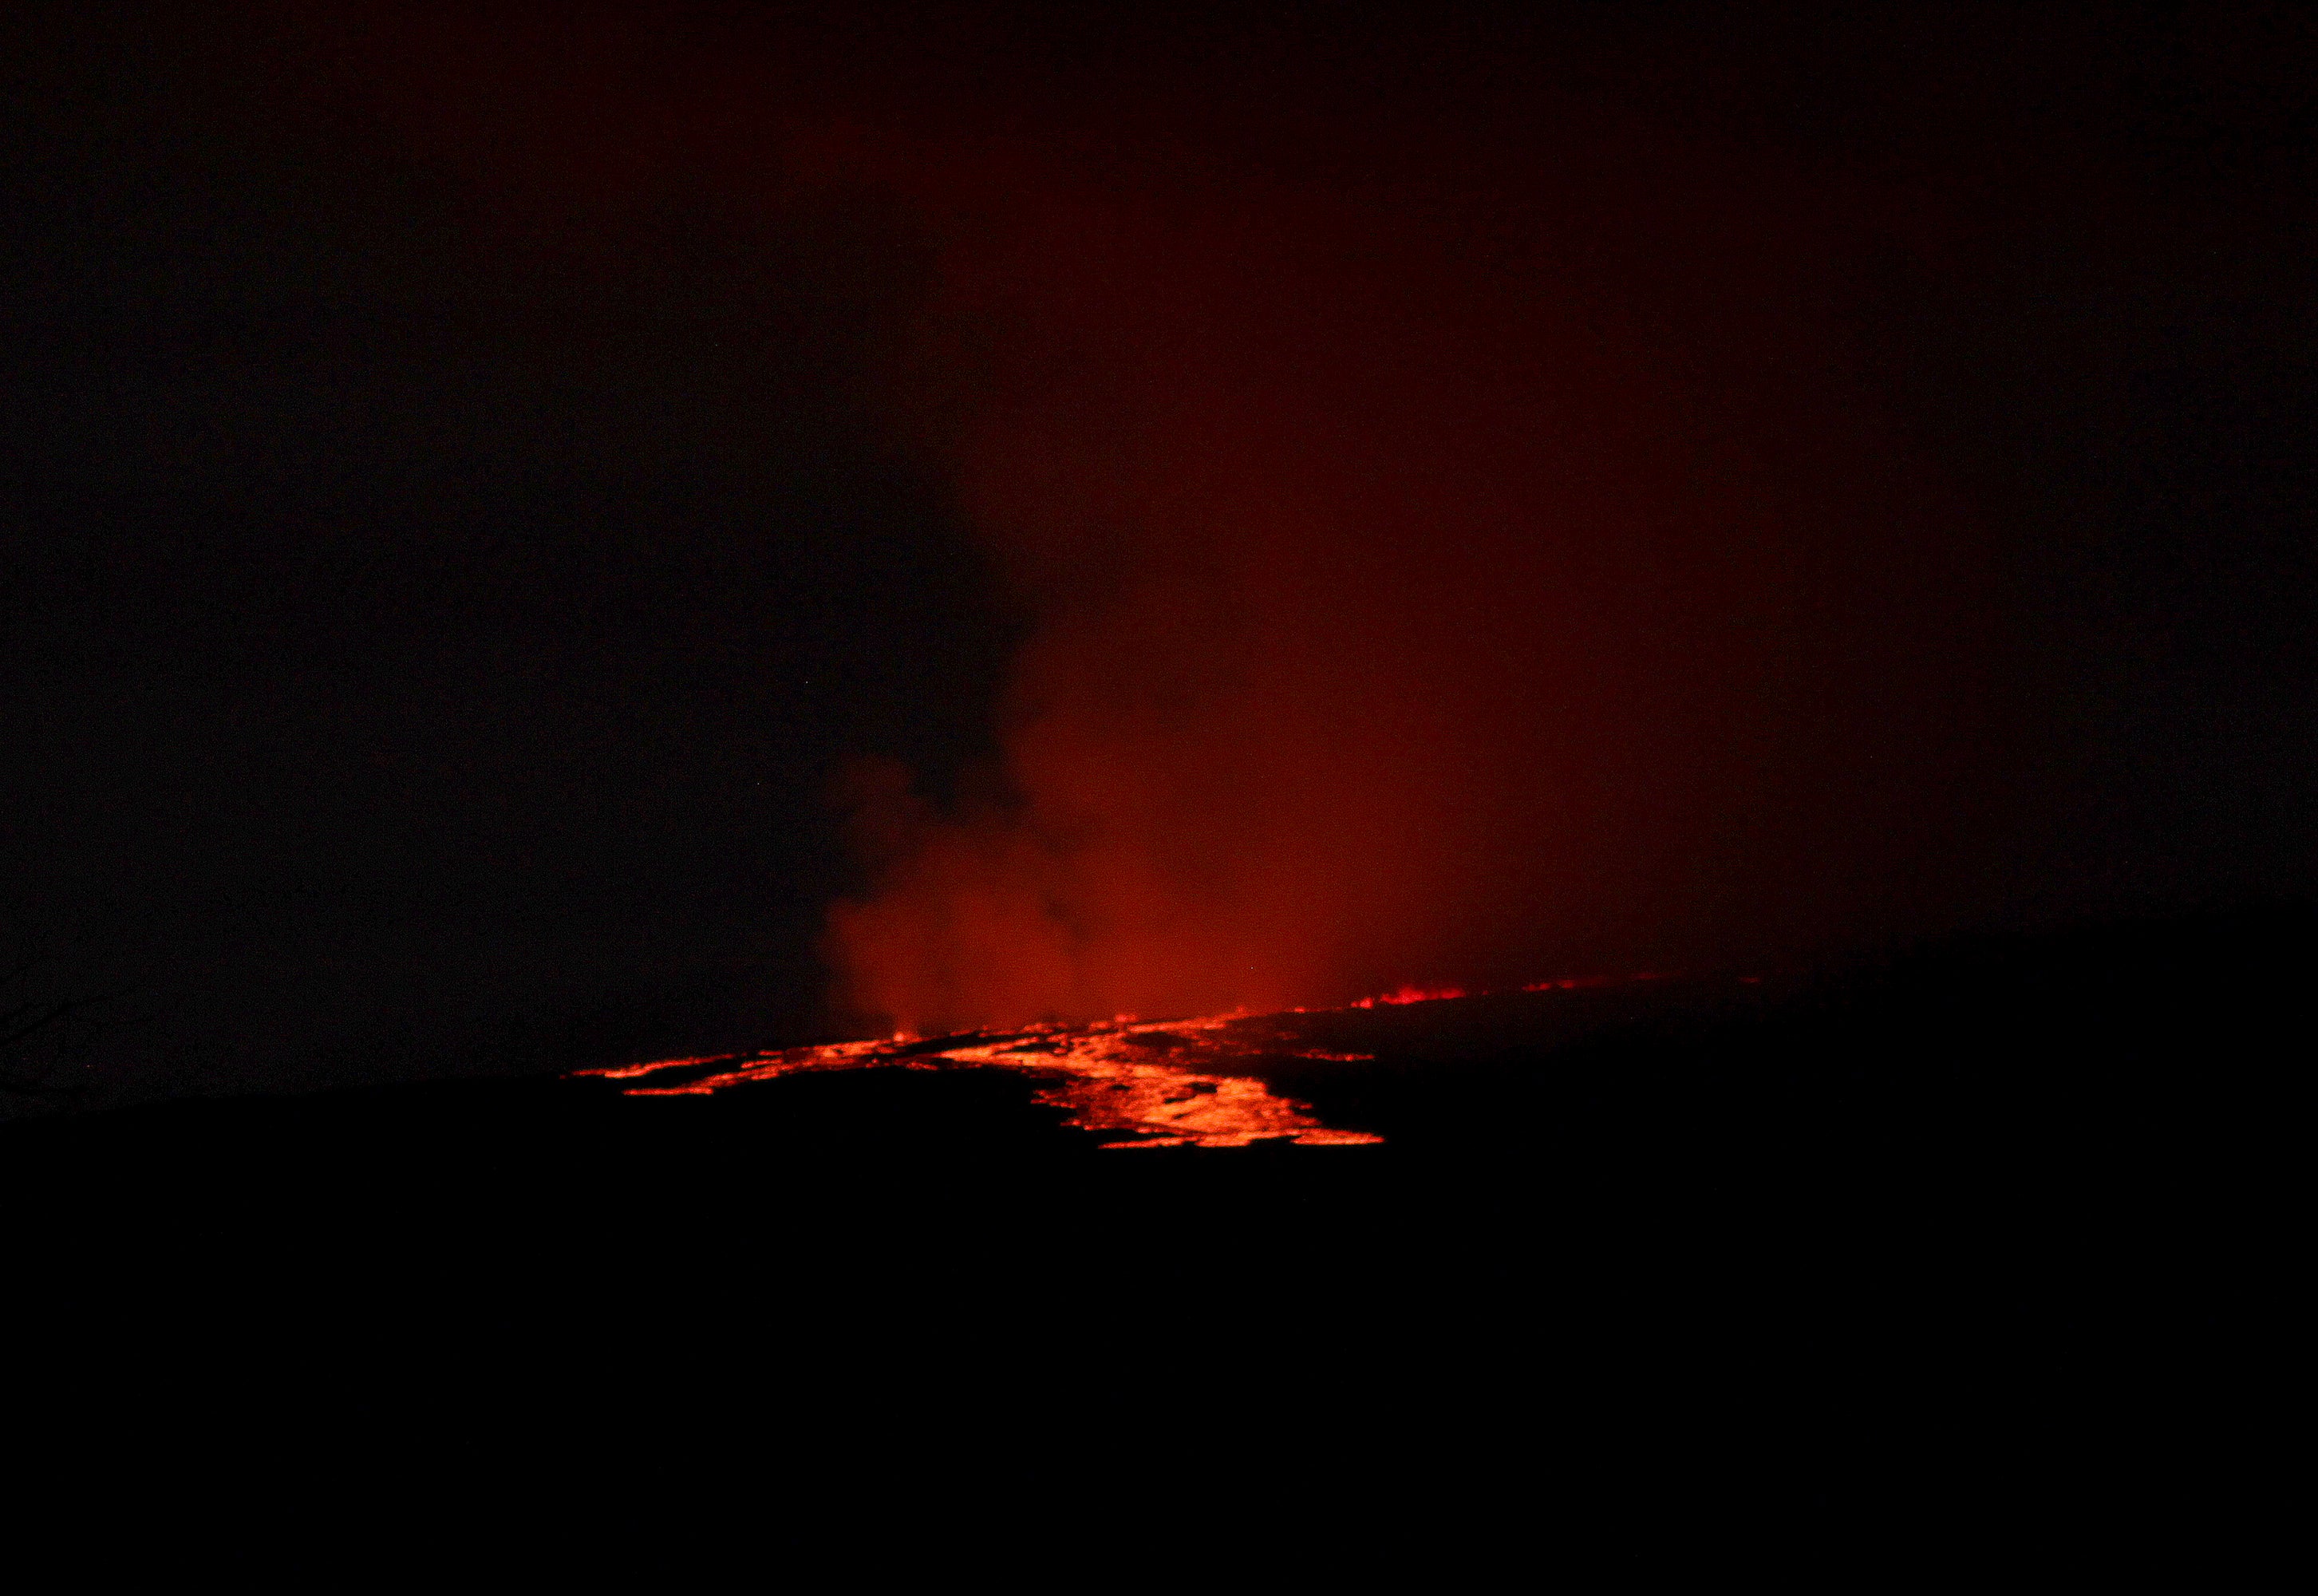 Walls of lava as tall as 200 ft were seen flowing from Mauna Loa, the US Geological Survey said Monday night, though most of the fountains remained only a few yards tall